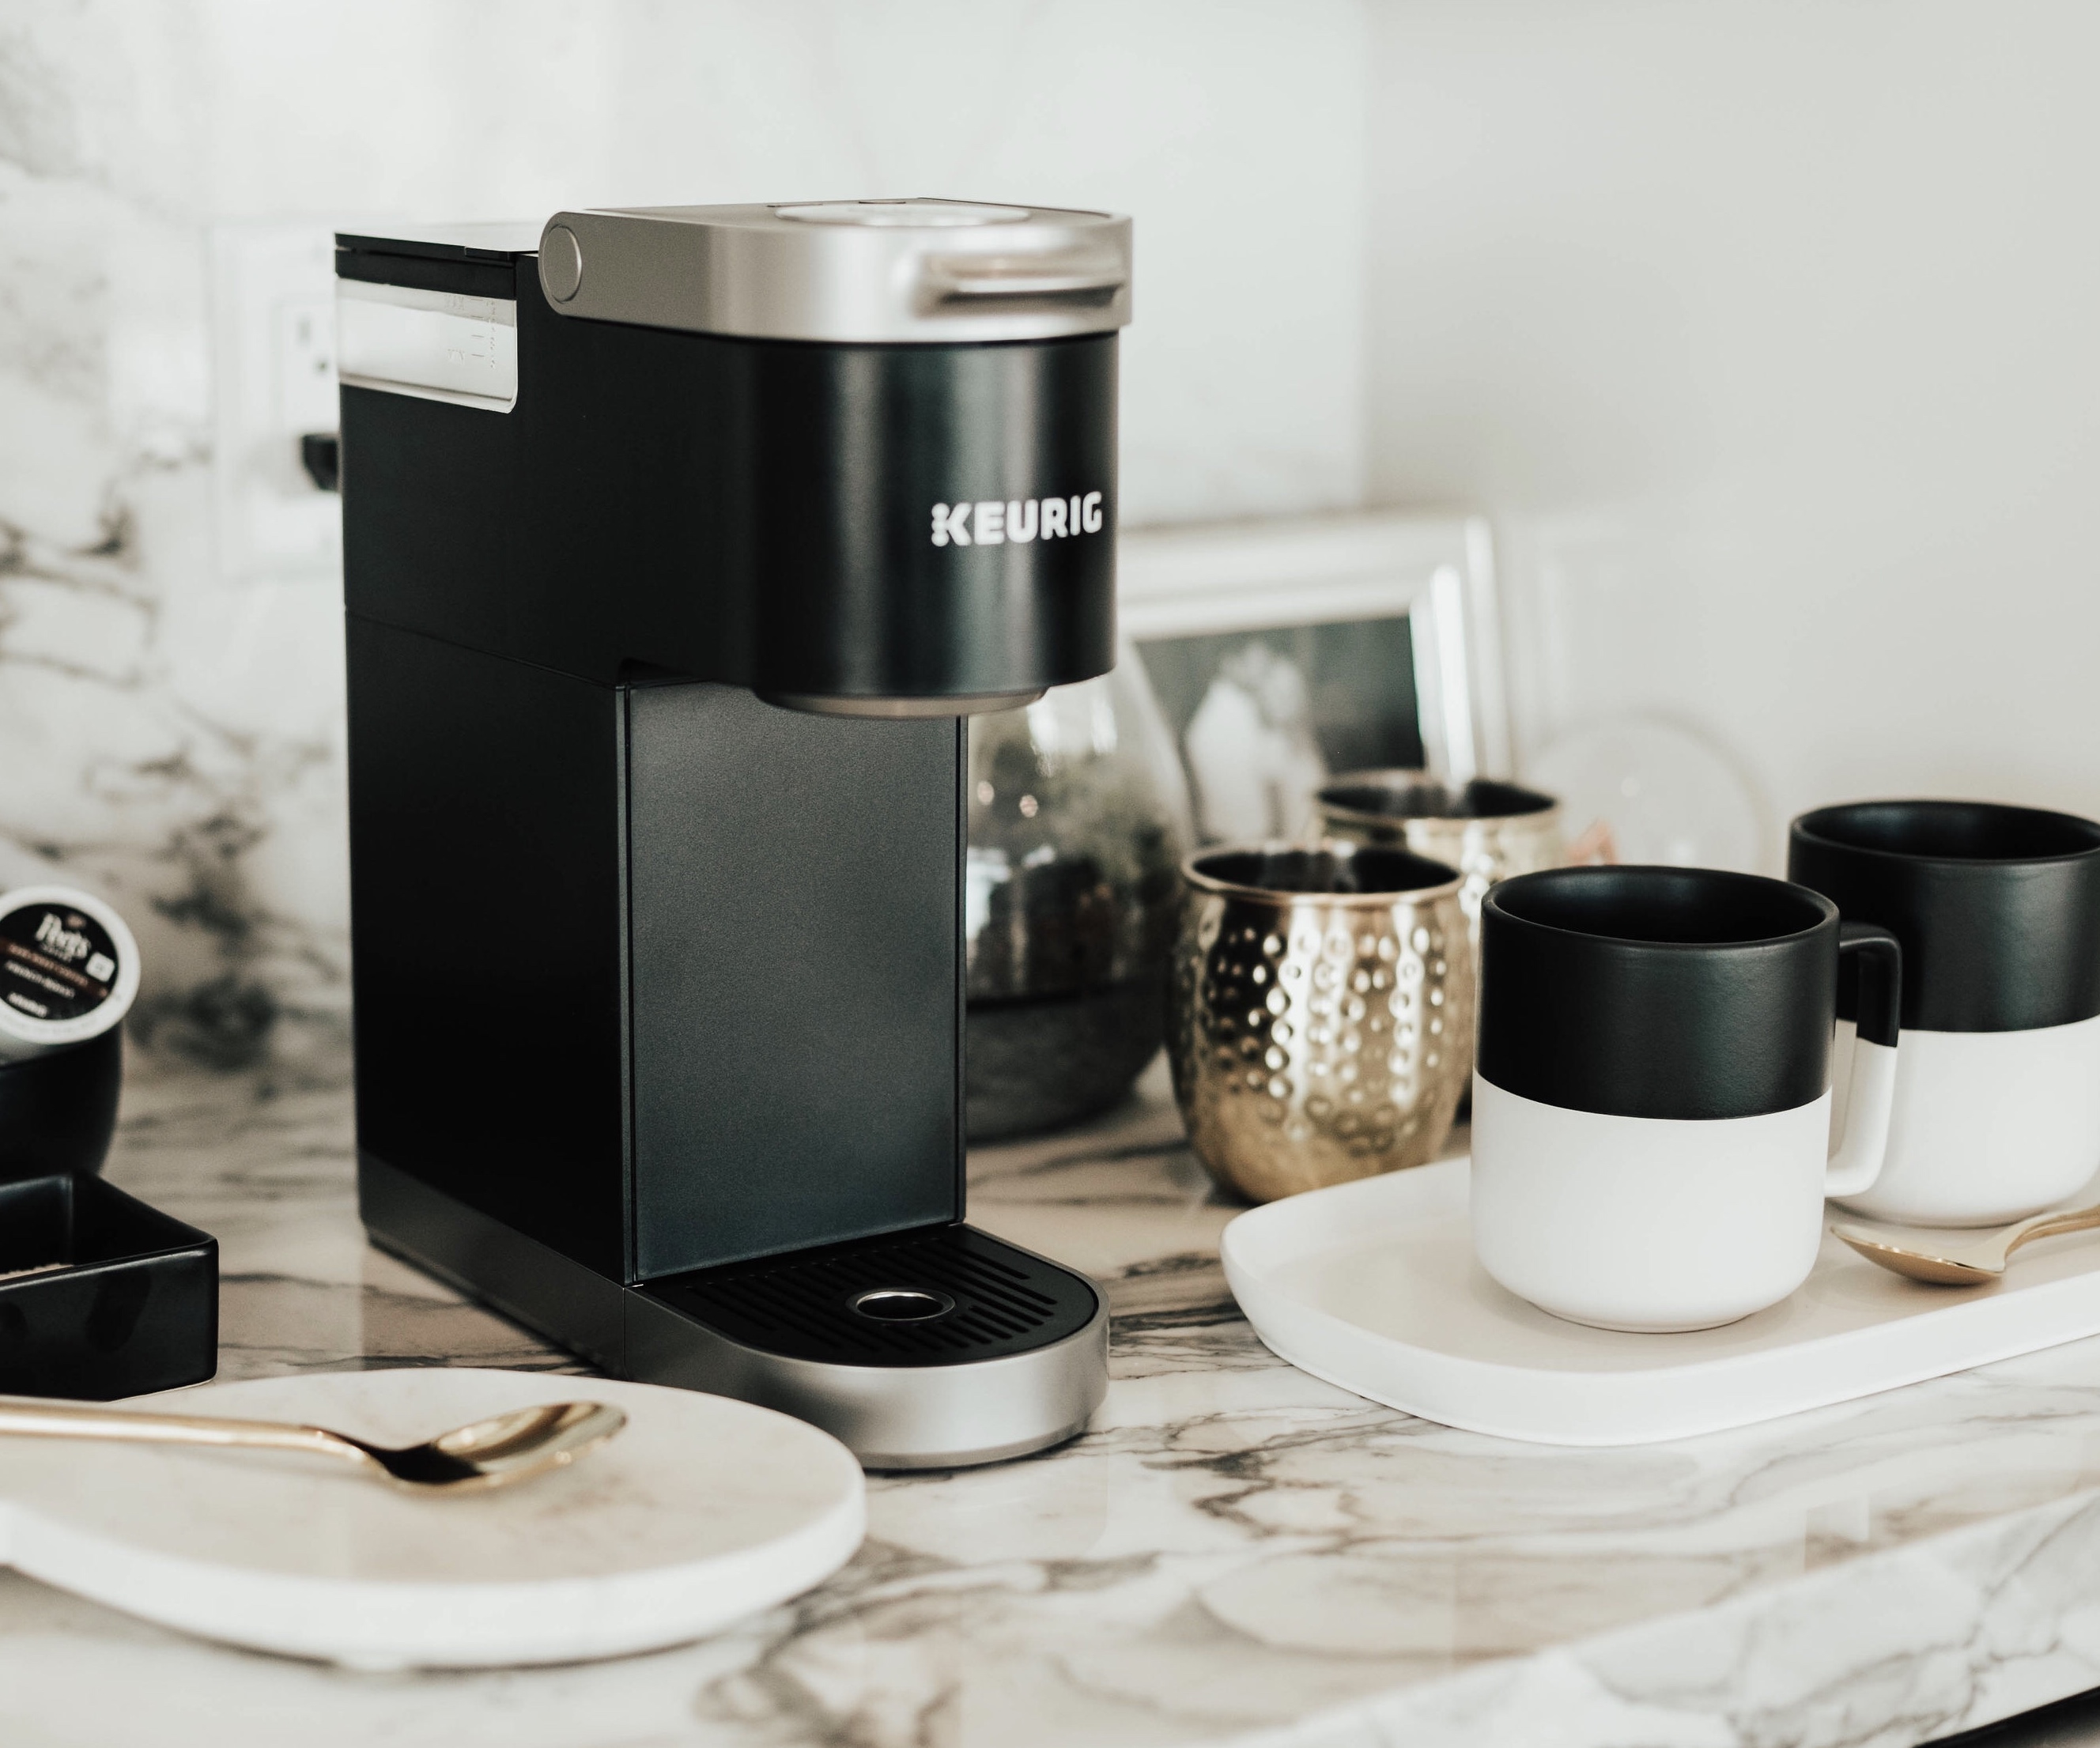 Emily Farren Wieczorek of Two Peas in a Prada shares her favorite coffee maker from Querig available on MEGA sale right now at QVC.